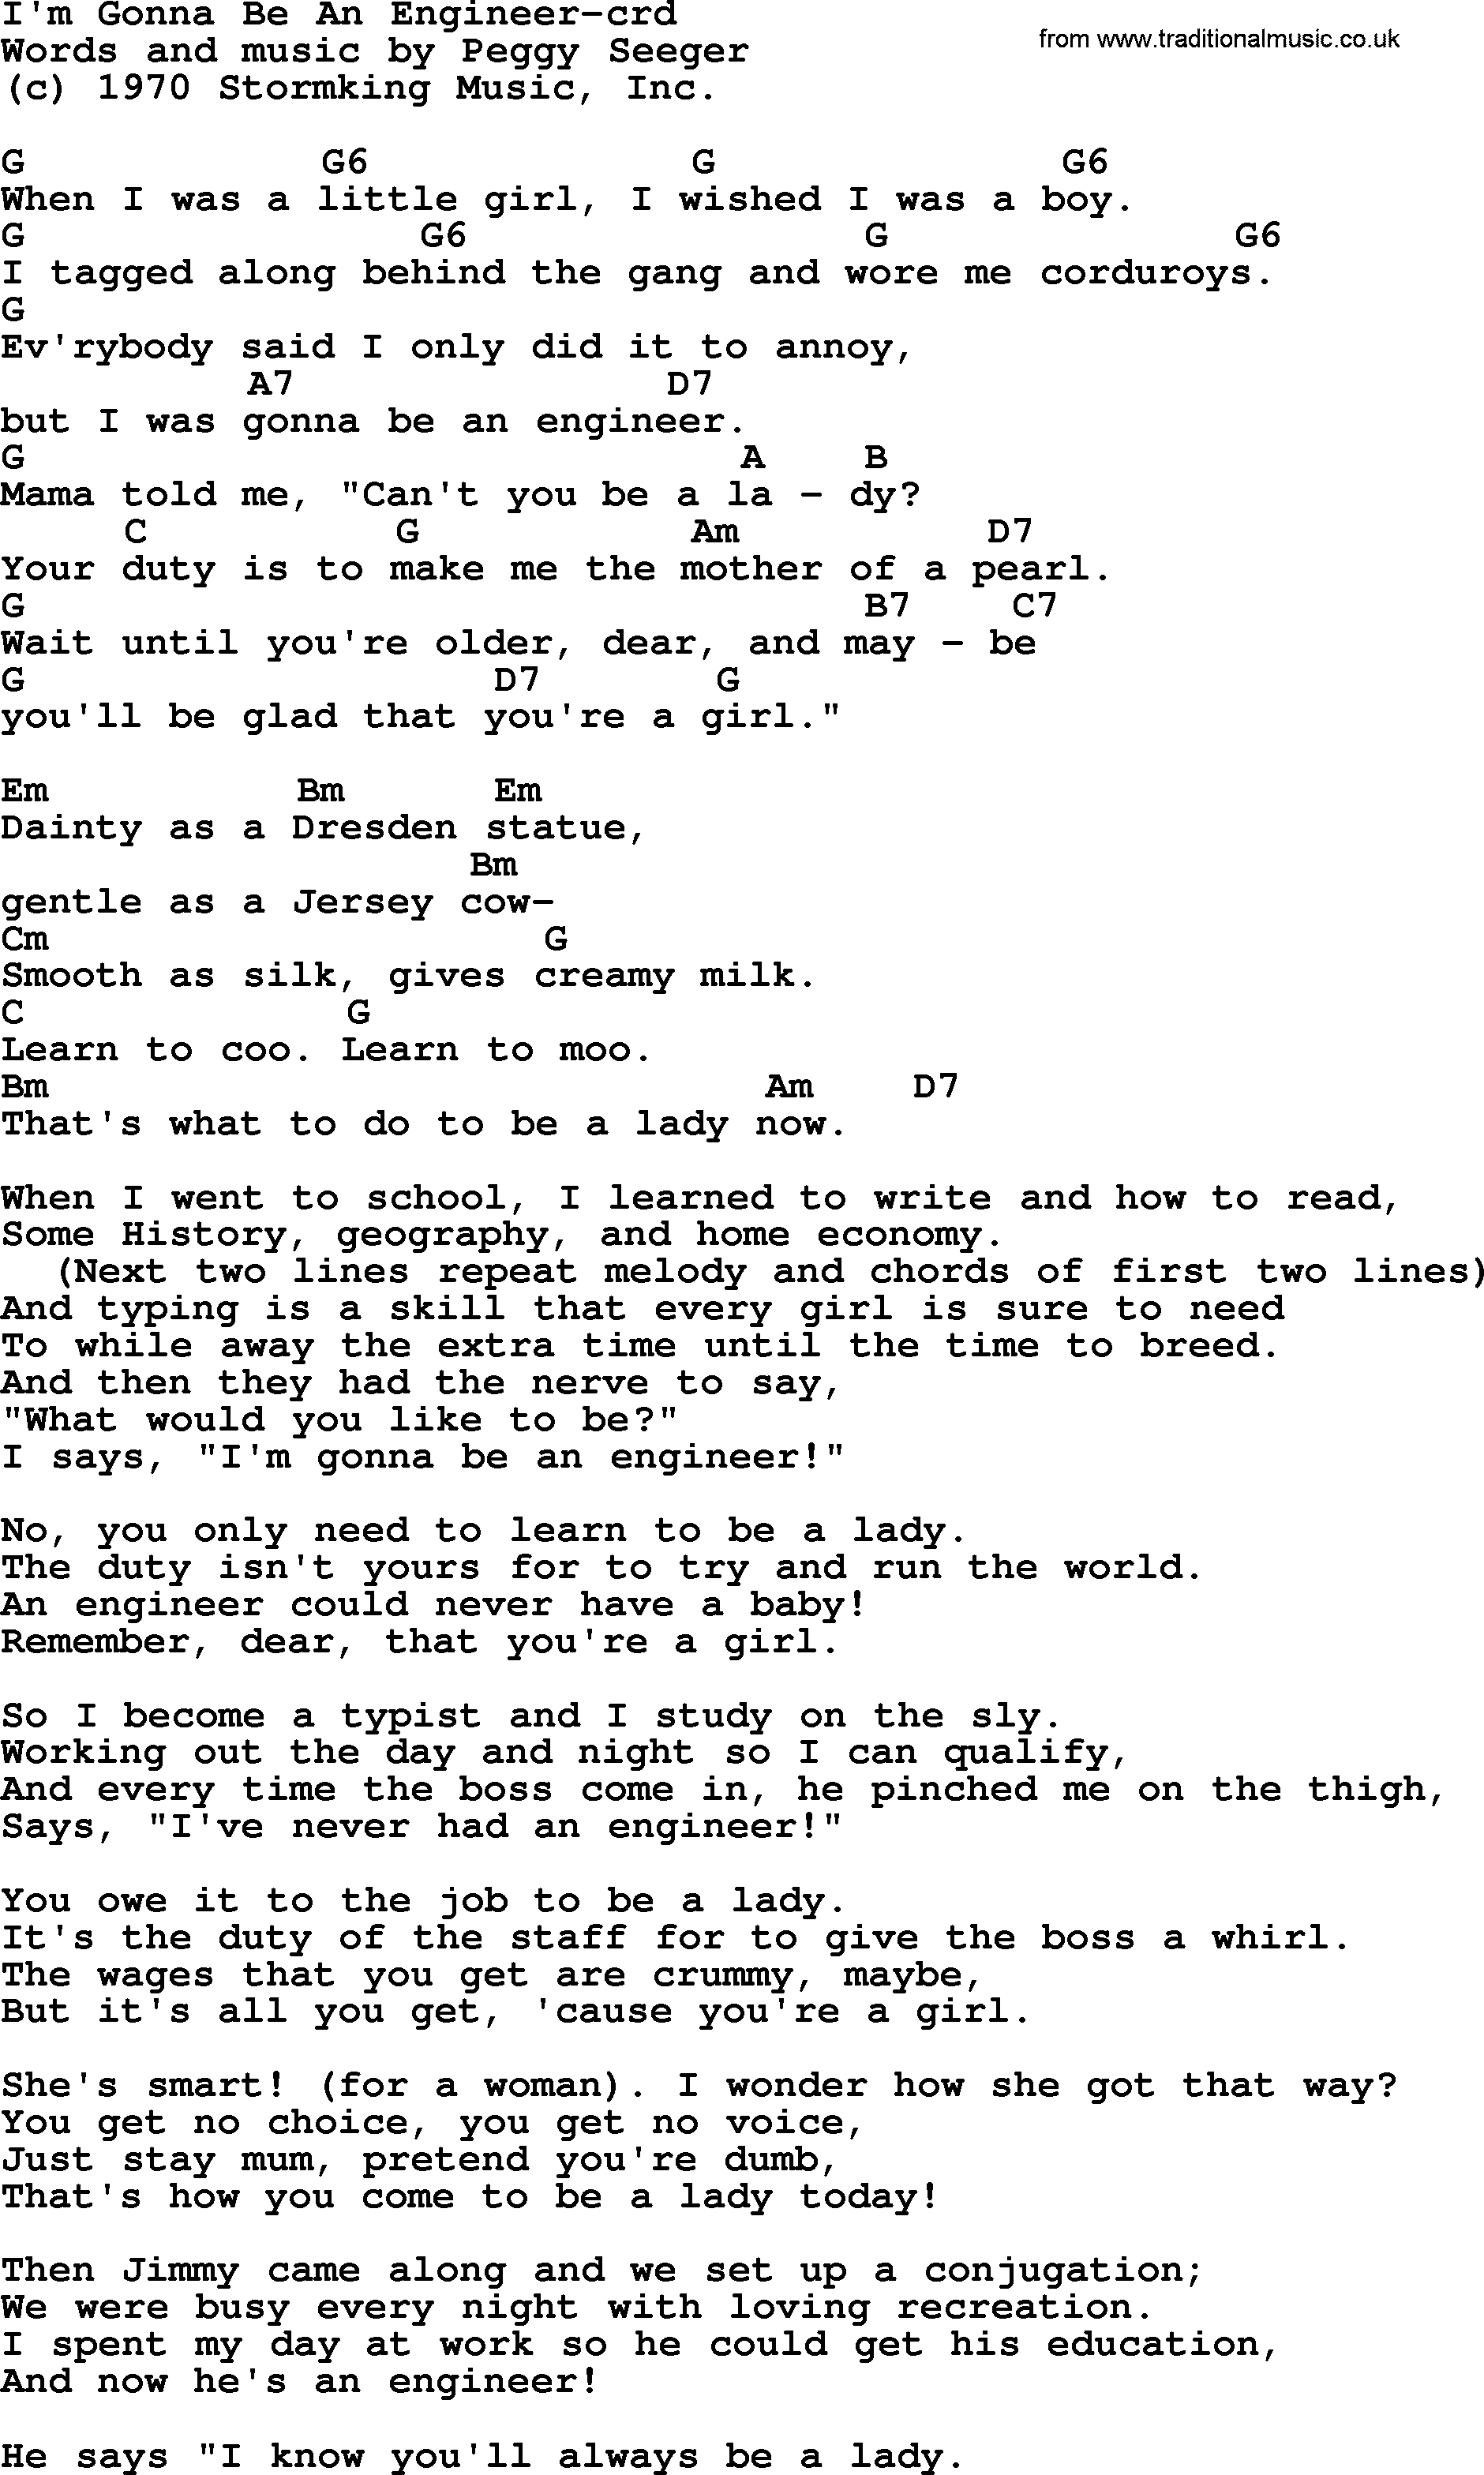 Pete Seeger song I'm Gonna Be An Engineer, lyrics and chords